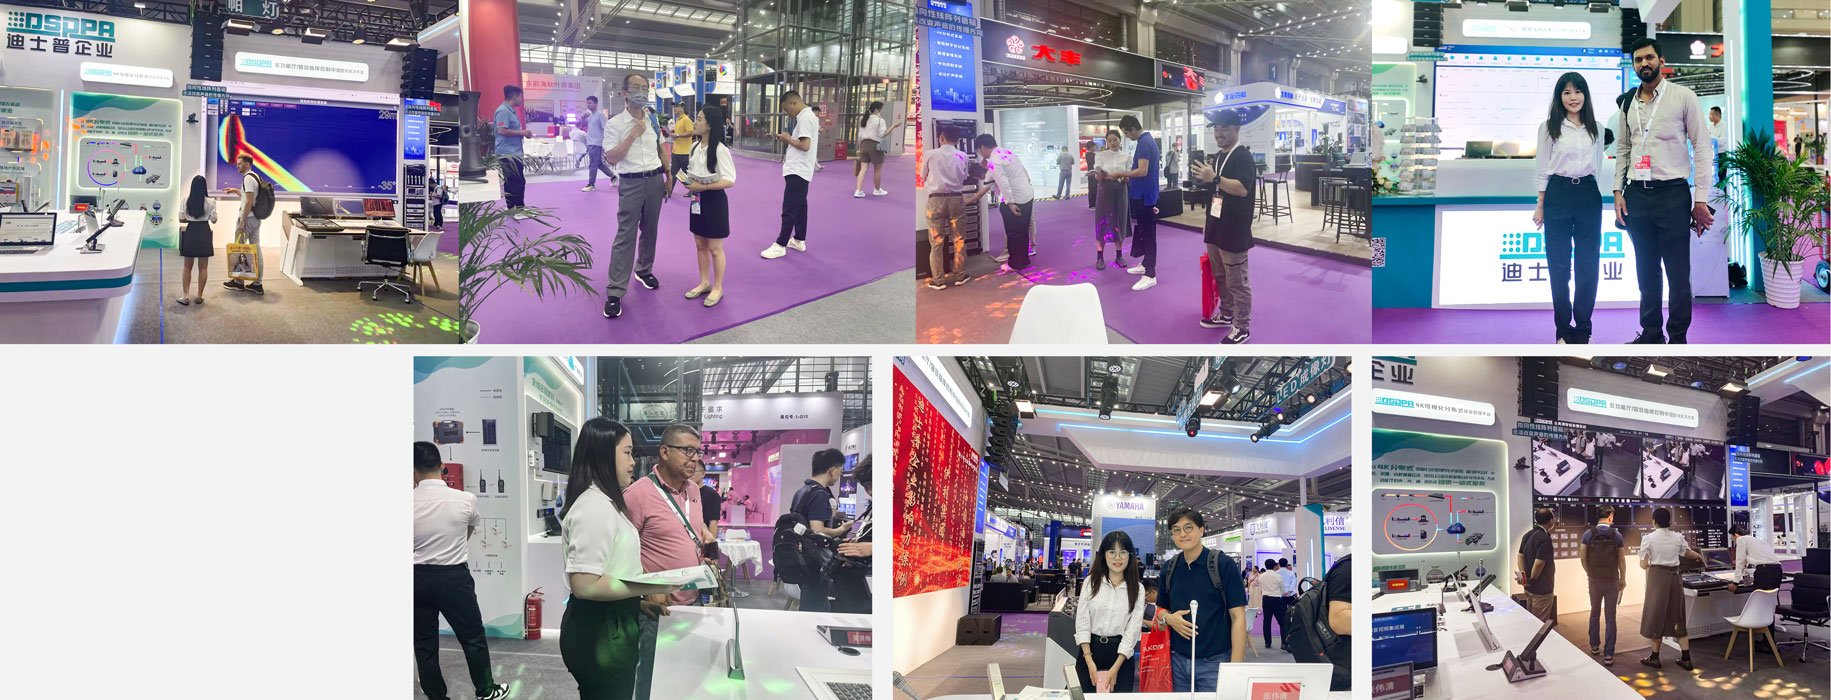 review-of-audiovisual-intel-integrated-system-exhibition-2.jpg